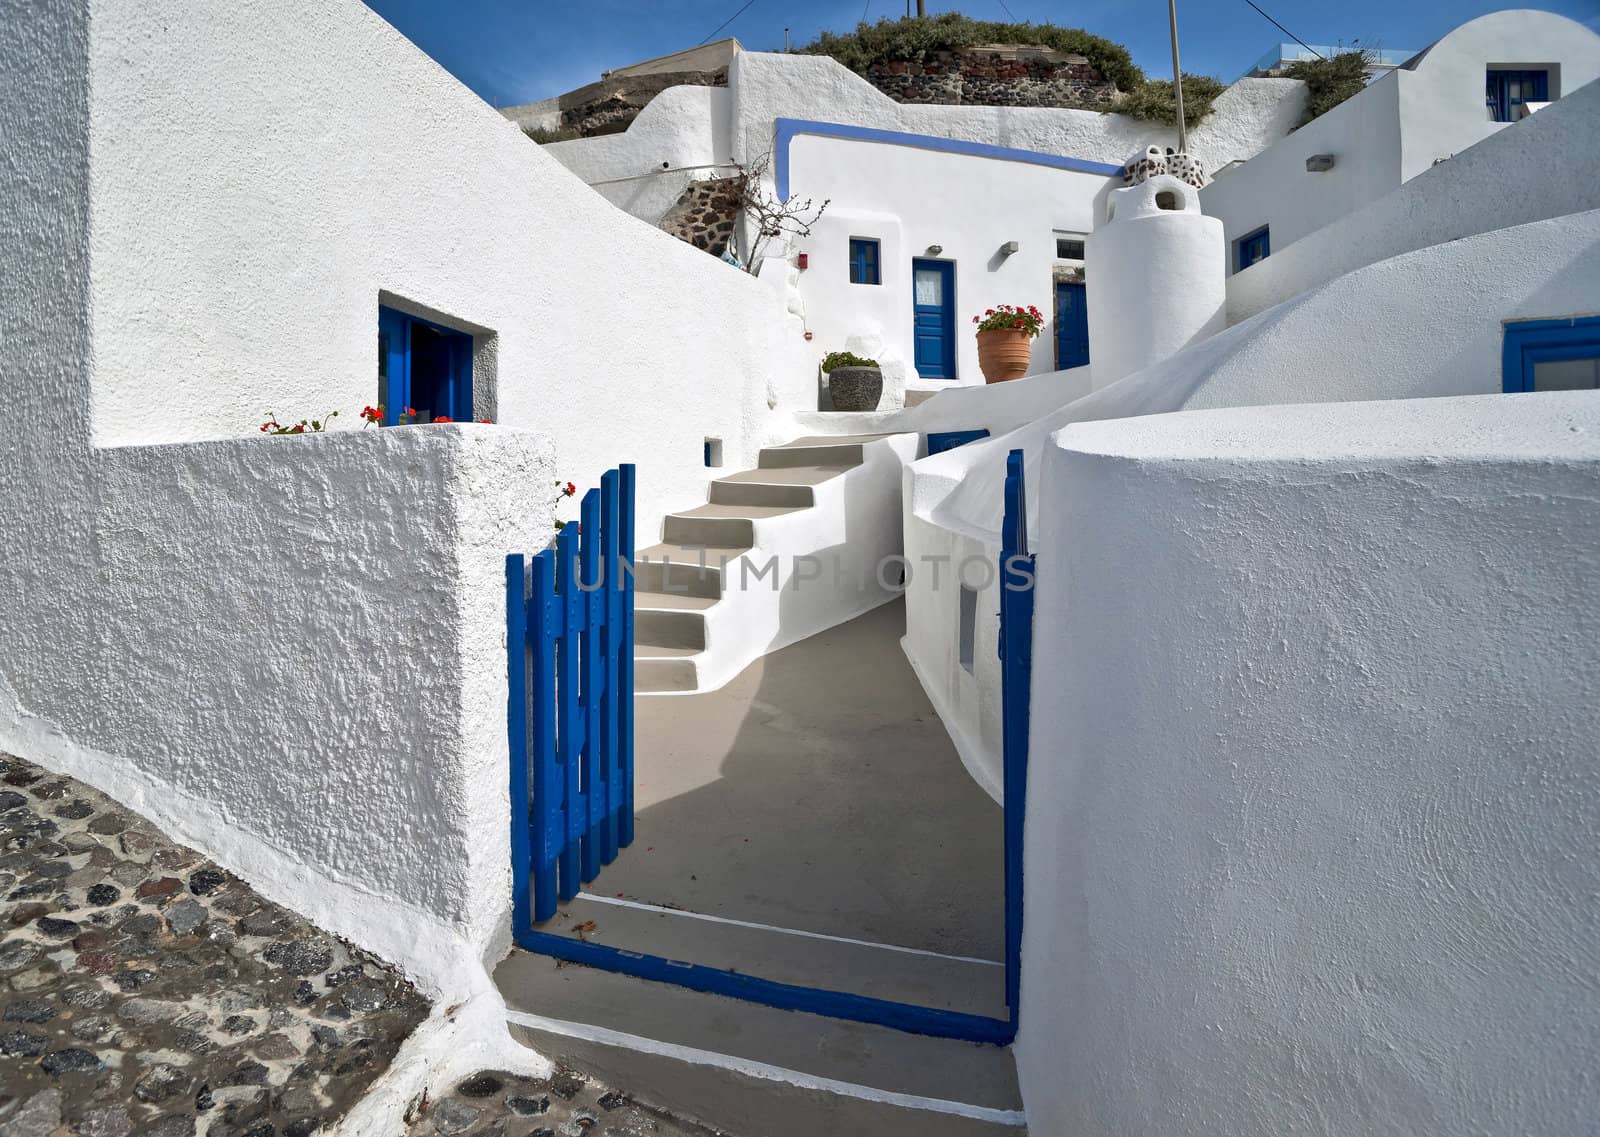 Cyclades architecture by mulden